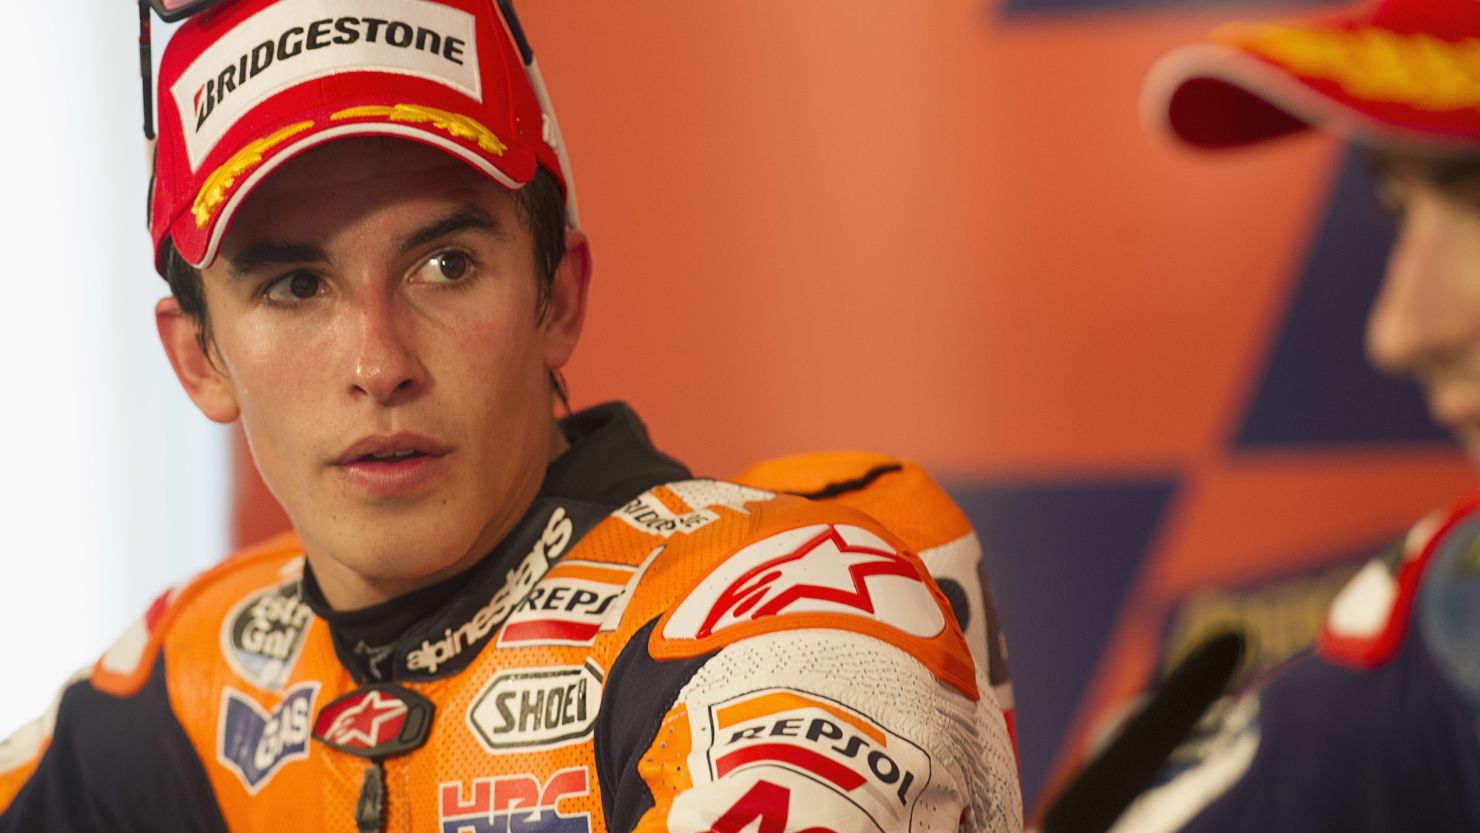 Should Marc Marquez receive another penalty, he will have to start the next race from the back of the grid.